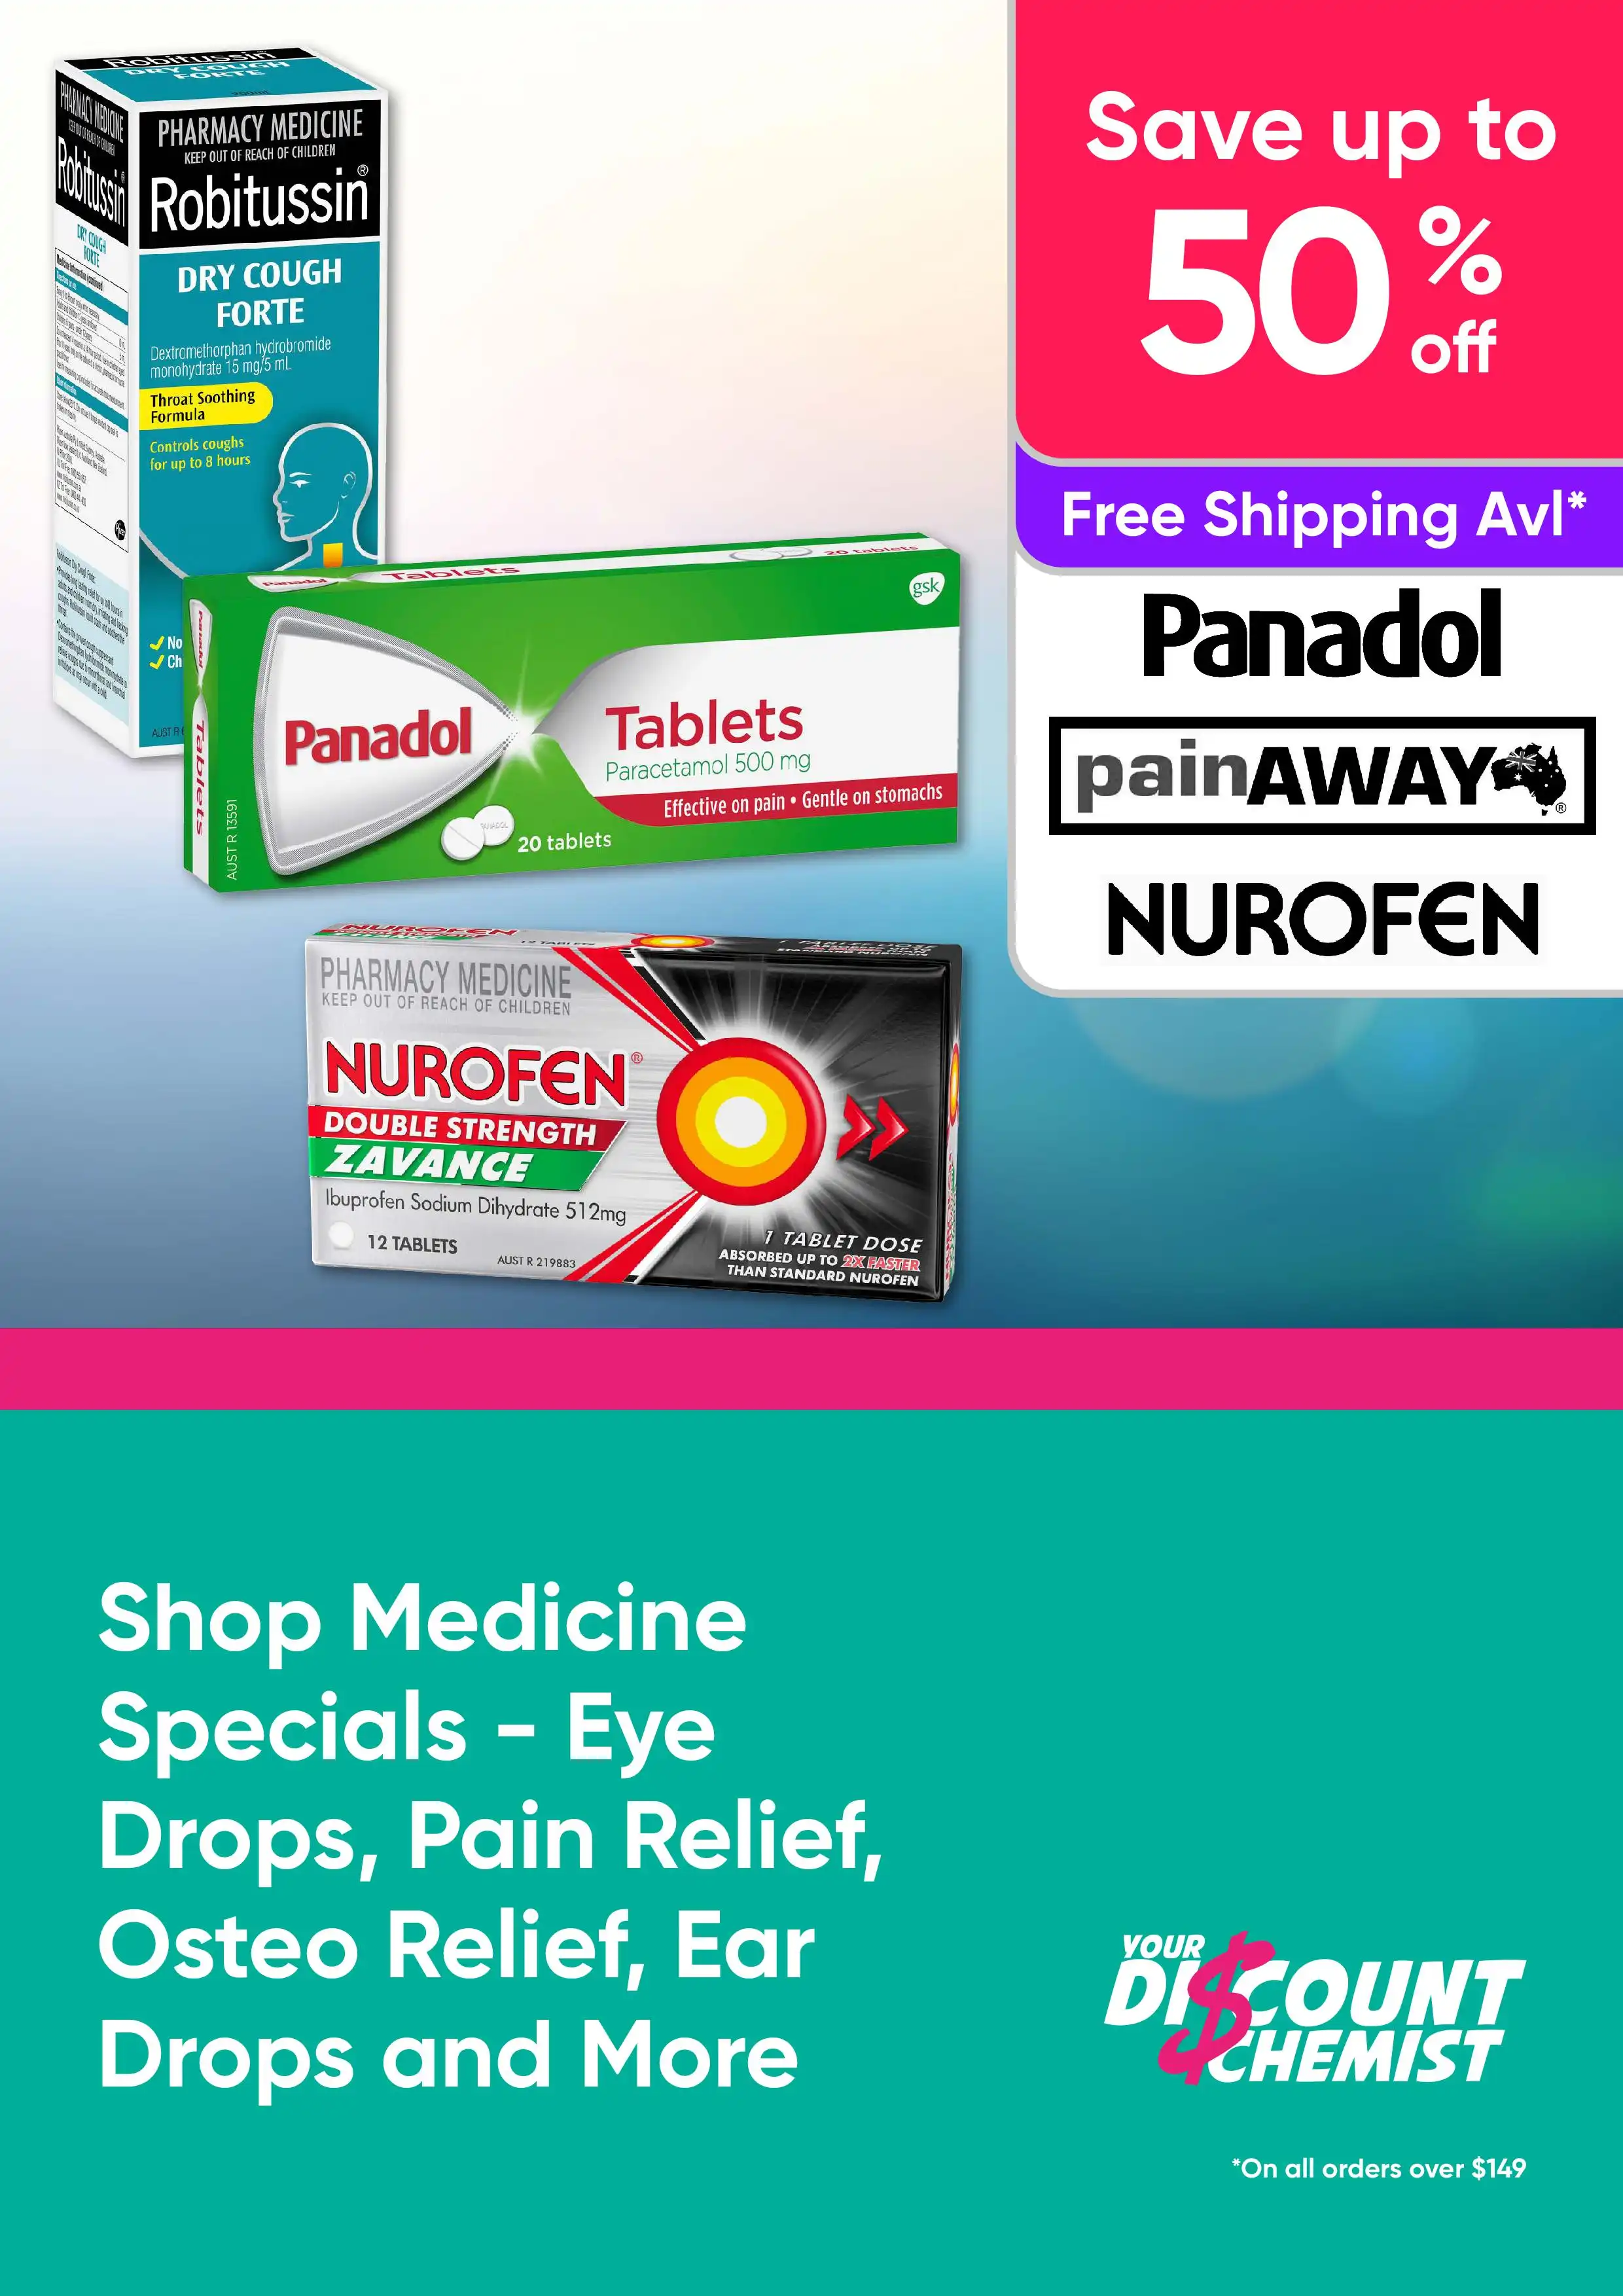 Shop Medicine Specials -Save Up To 50% Off Eye Drops, Pain Relief, Osteo Relief, Ear Drops and More